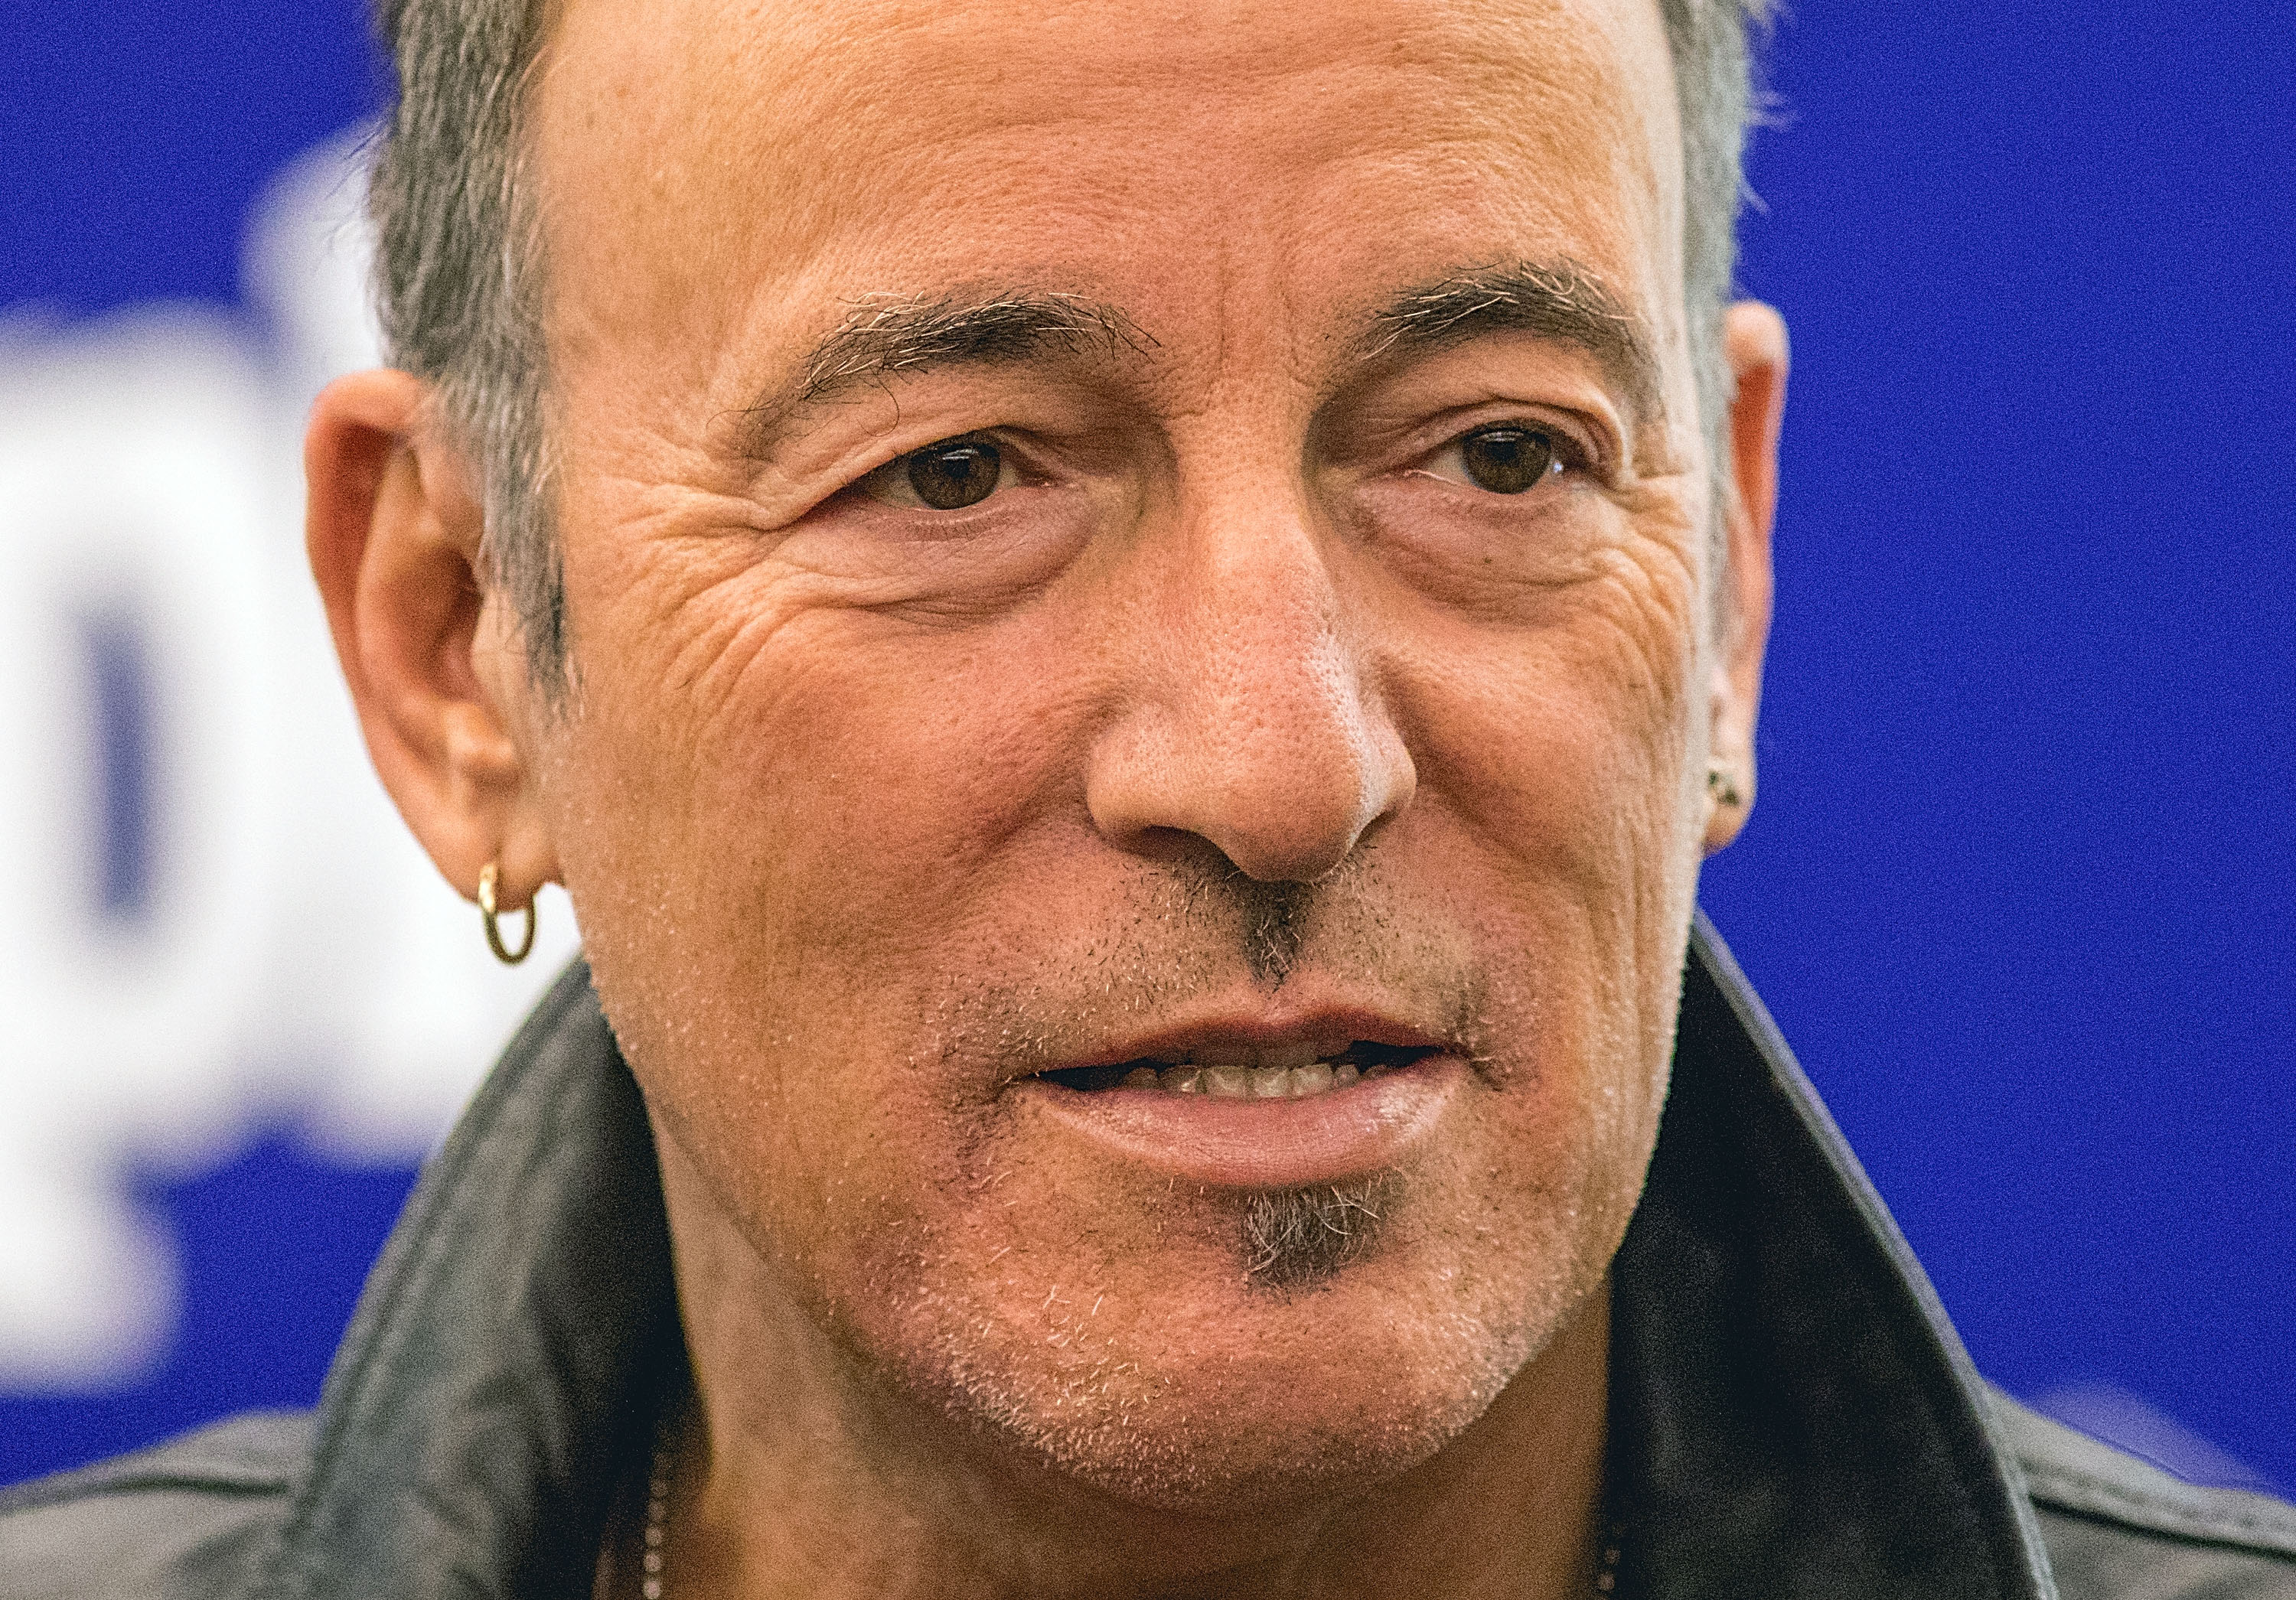 Bruce Springsteen in Austin, Texas on December 1, 2016. | Source: Getty Images